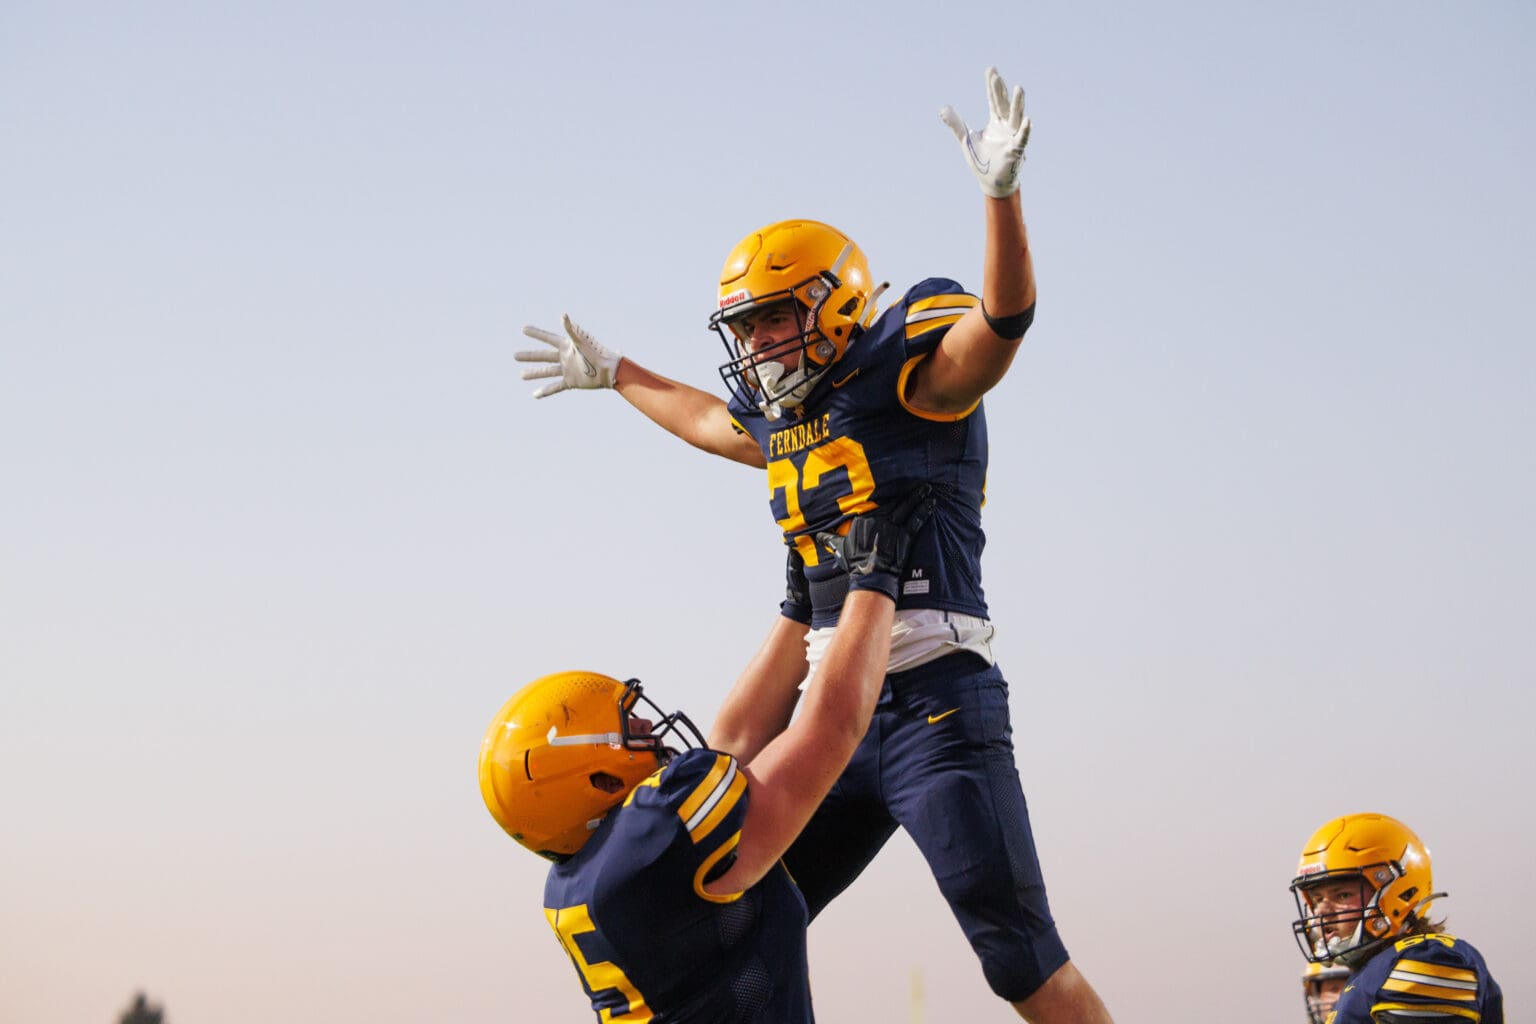 Ferndale’s Phoenyx Finkbonner is lifted into the air Sept. 15 after scoring a touchdown in Ferndale’s 22-16 win over Glacier Peak. The Golden Eagles will host Timberline for their week 10 playoff game with a 3A state tournament berth on the line.